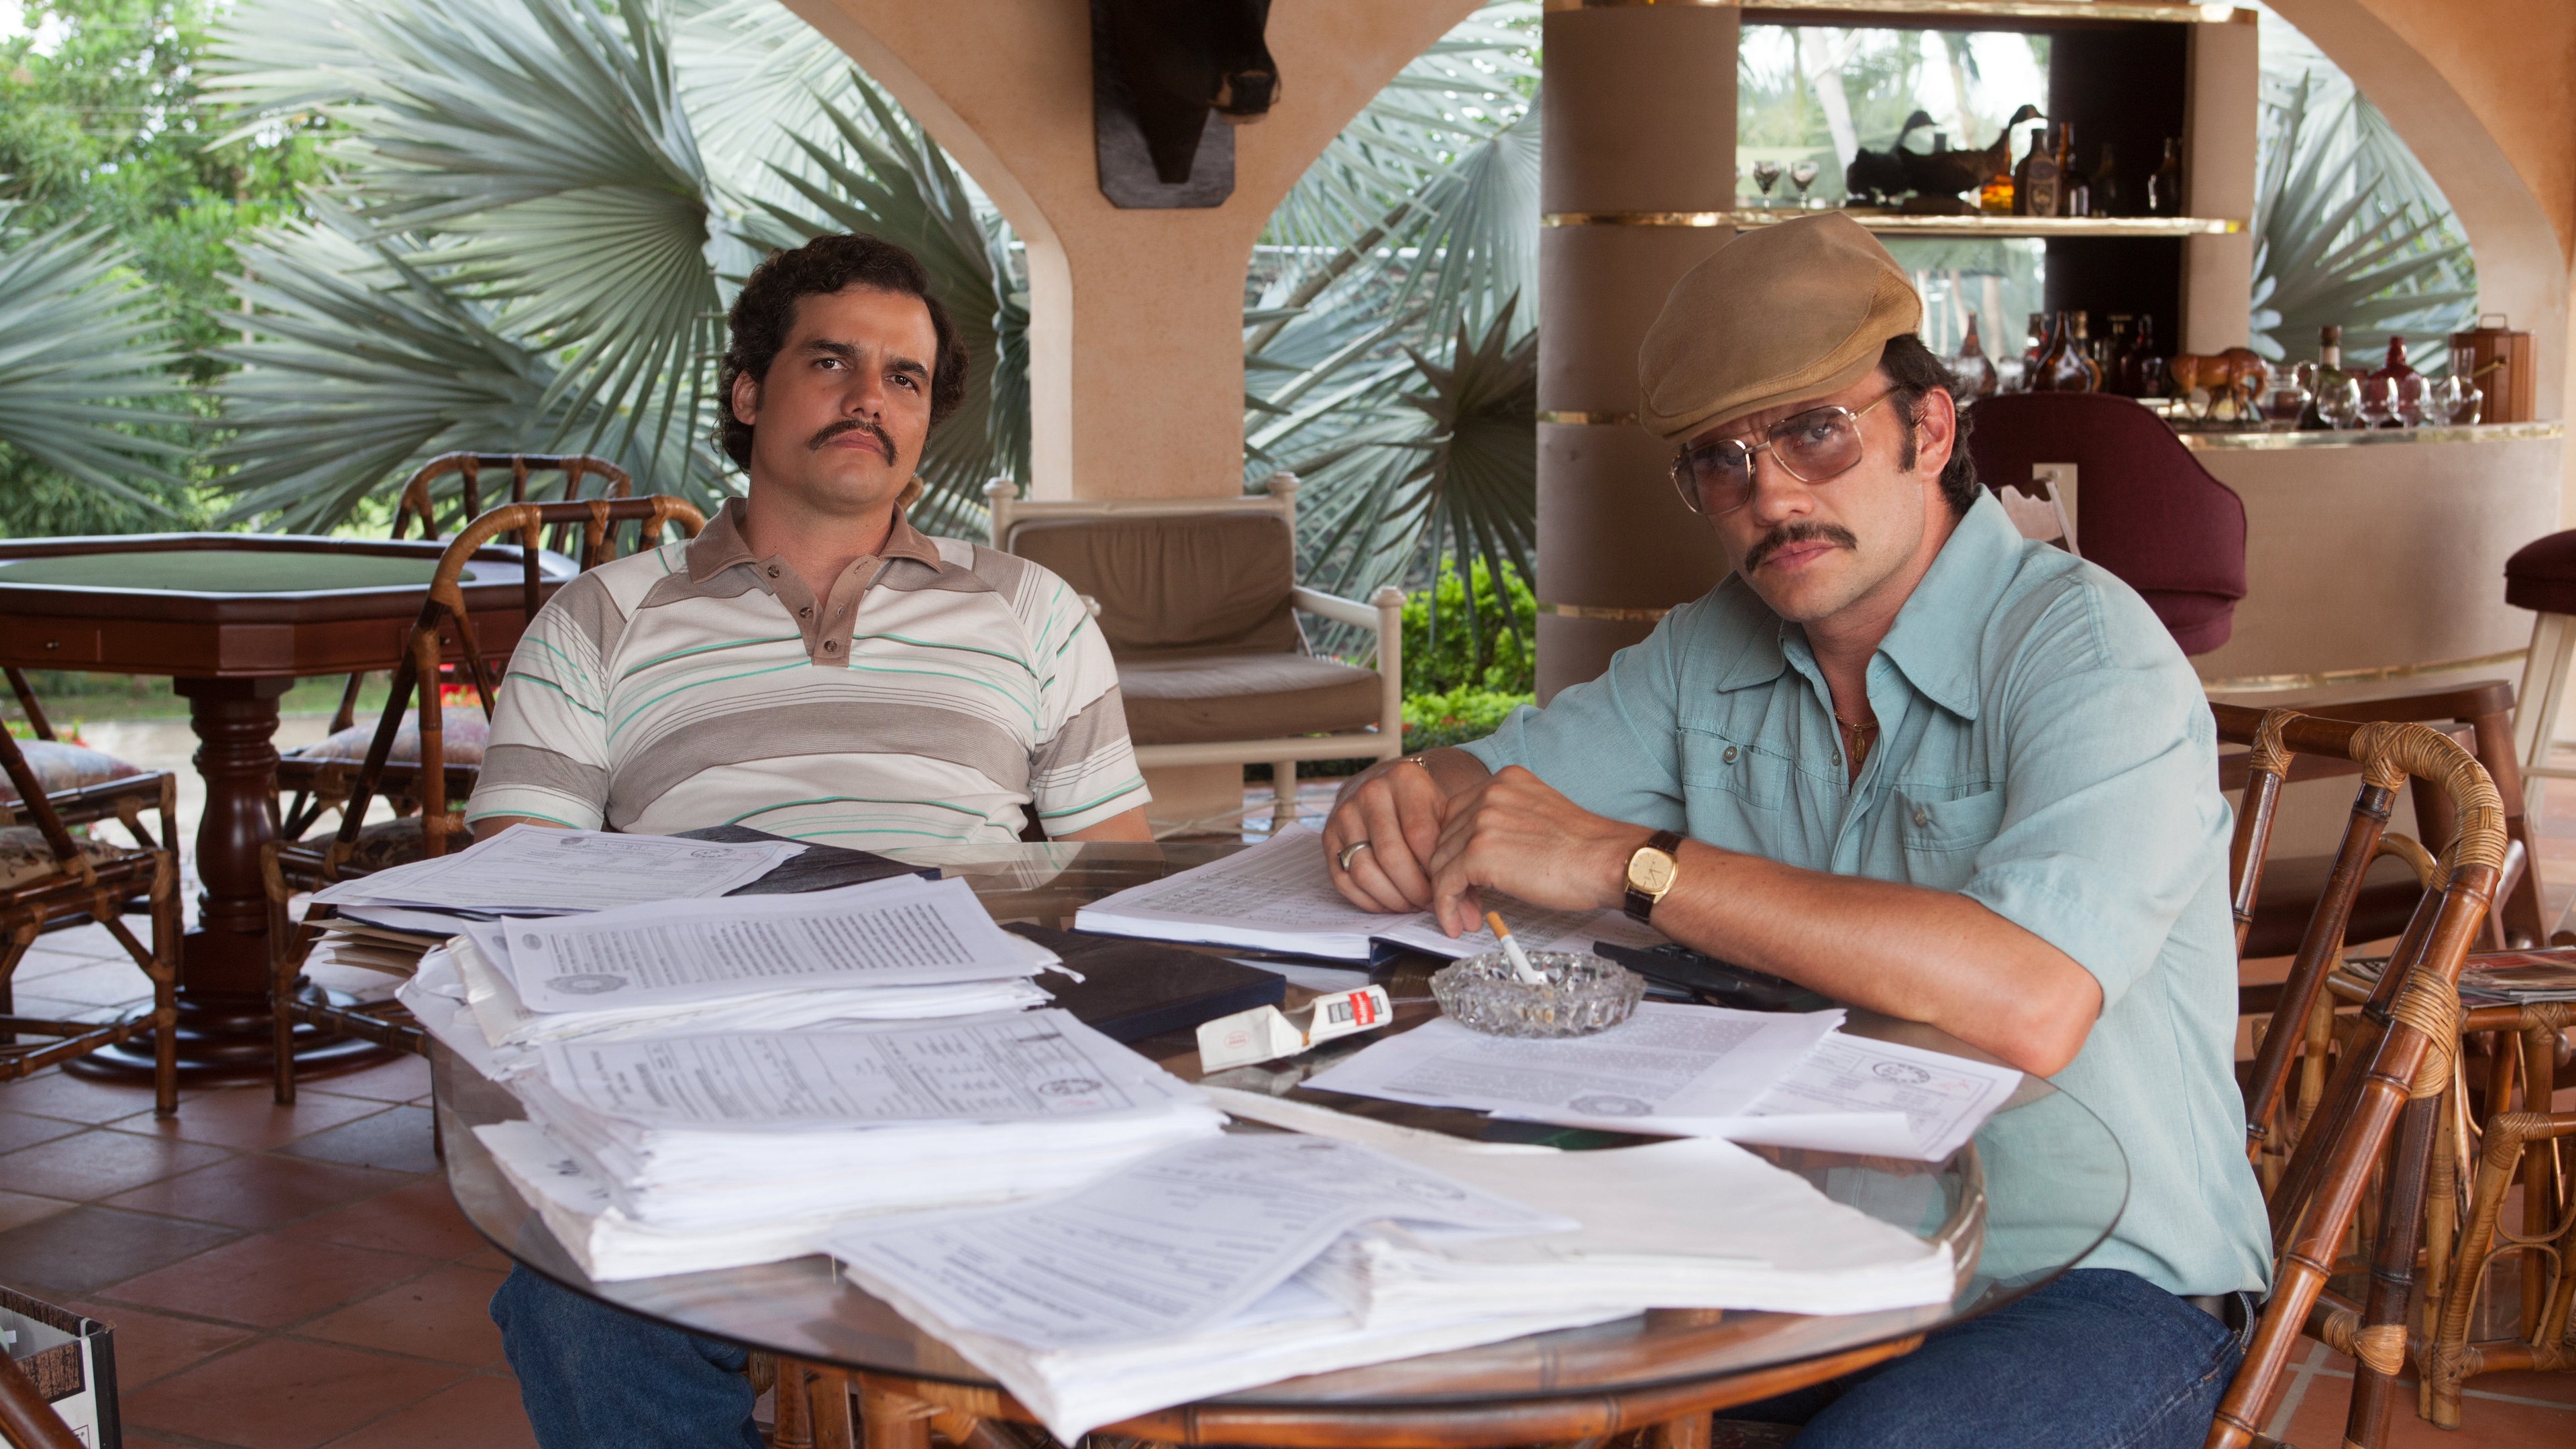 Pablo and Gustavo Narcos for 3840 x 2160 Ultra HD resolution